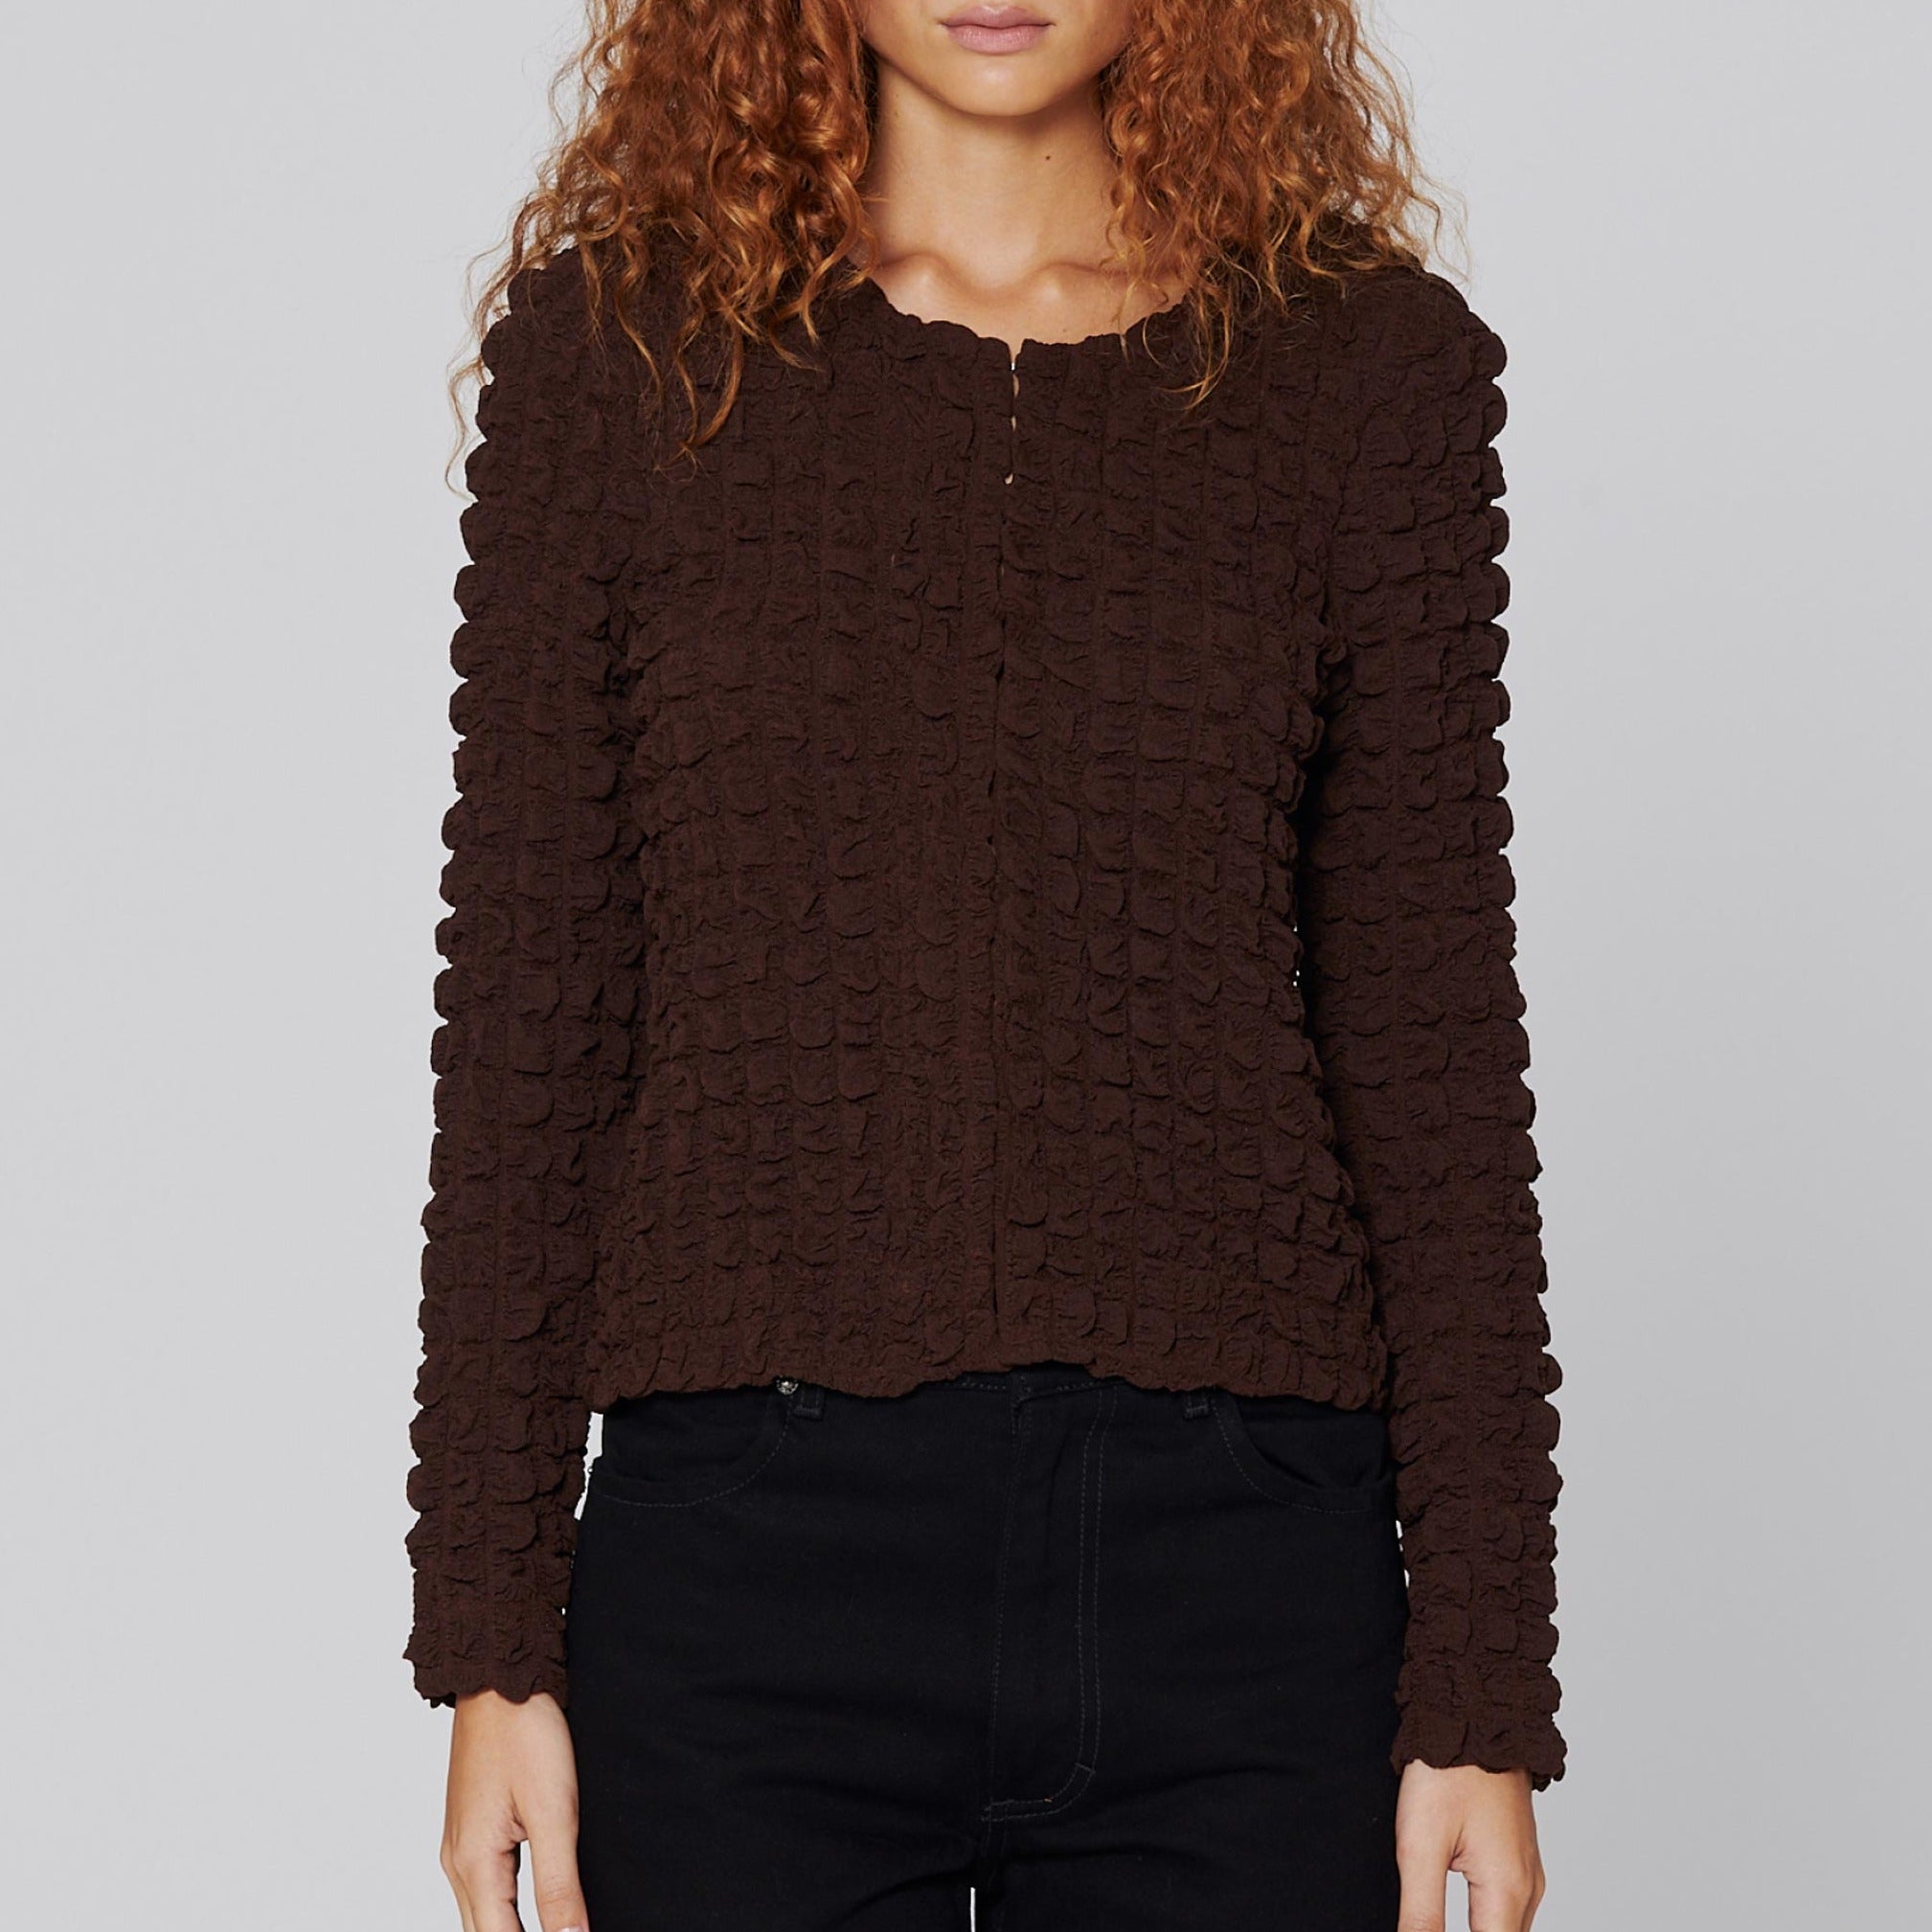 Front half body photo of model wearing the Bubble Cardigan - Umber.